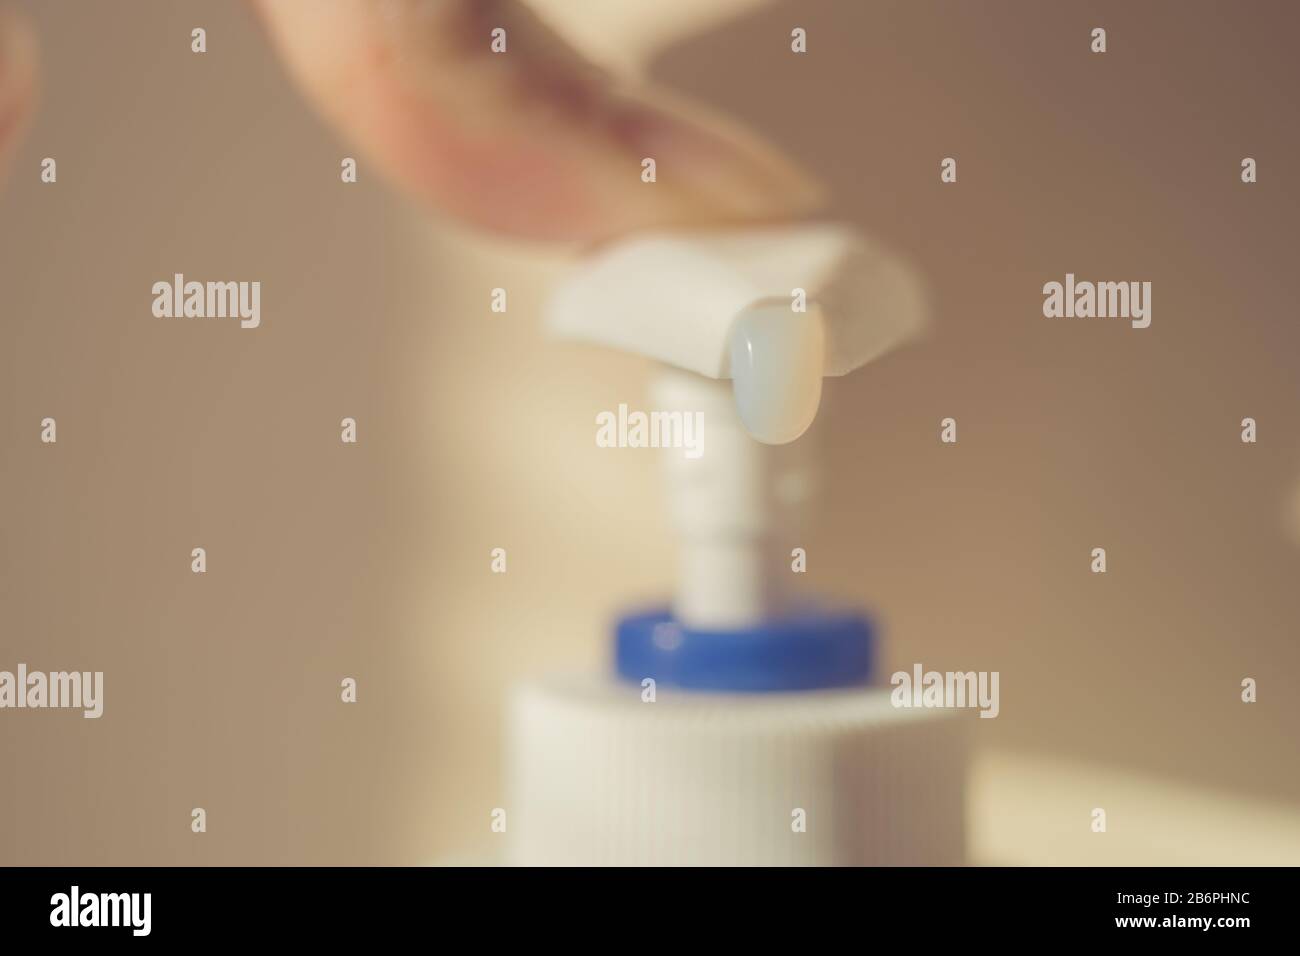 Female finger touch on a liquid soap dispenser. White gel begins to fall out of the bottle. Stock Photo